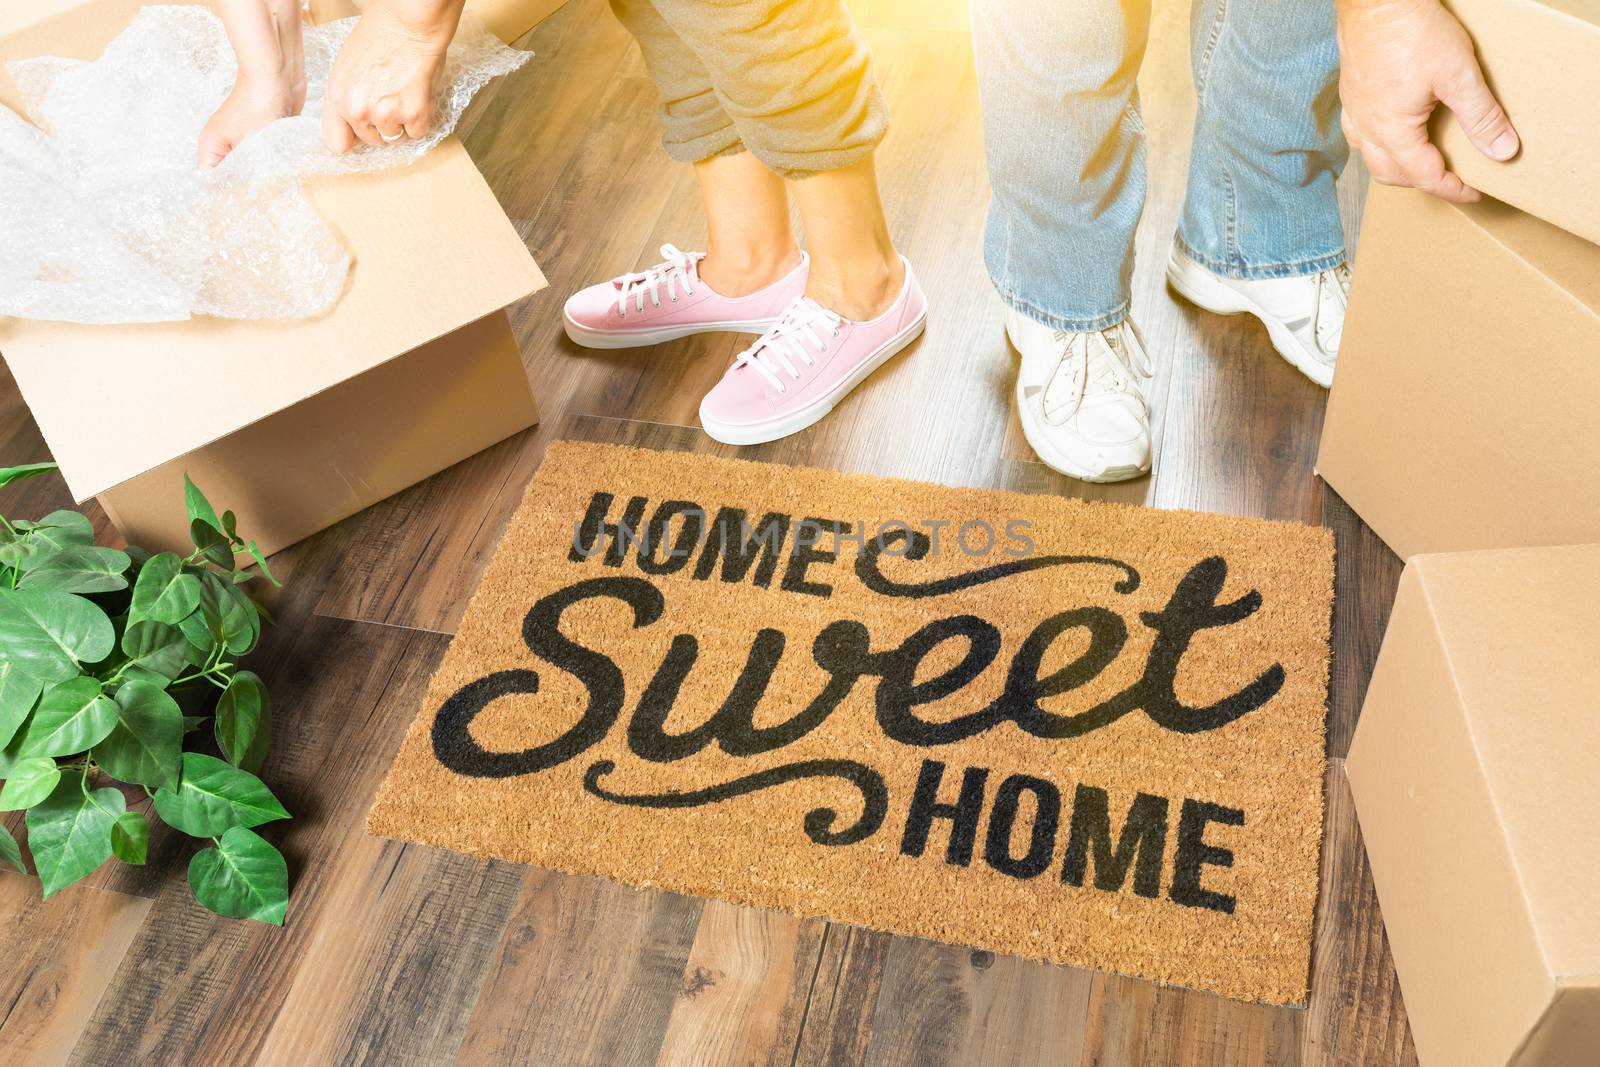 Man and Woman Unpacking Near Home Sweet Home Welcome Mat, Moving by Feverpitched